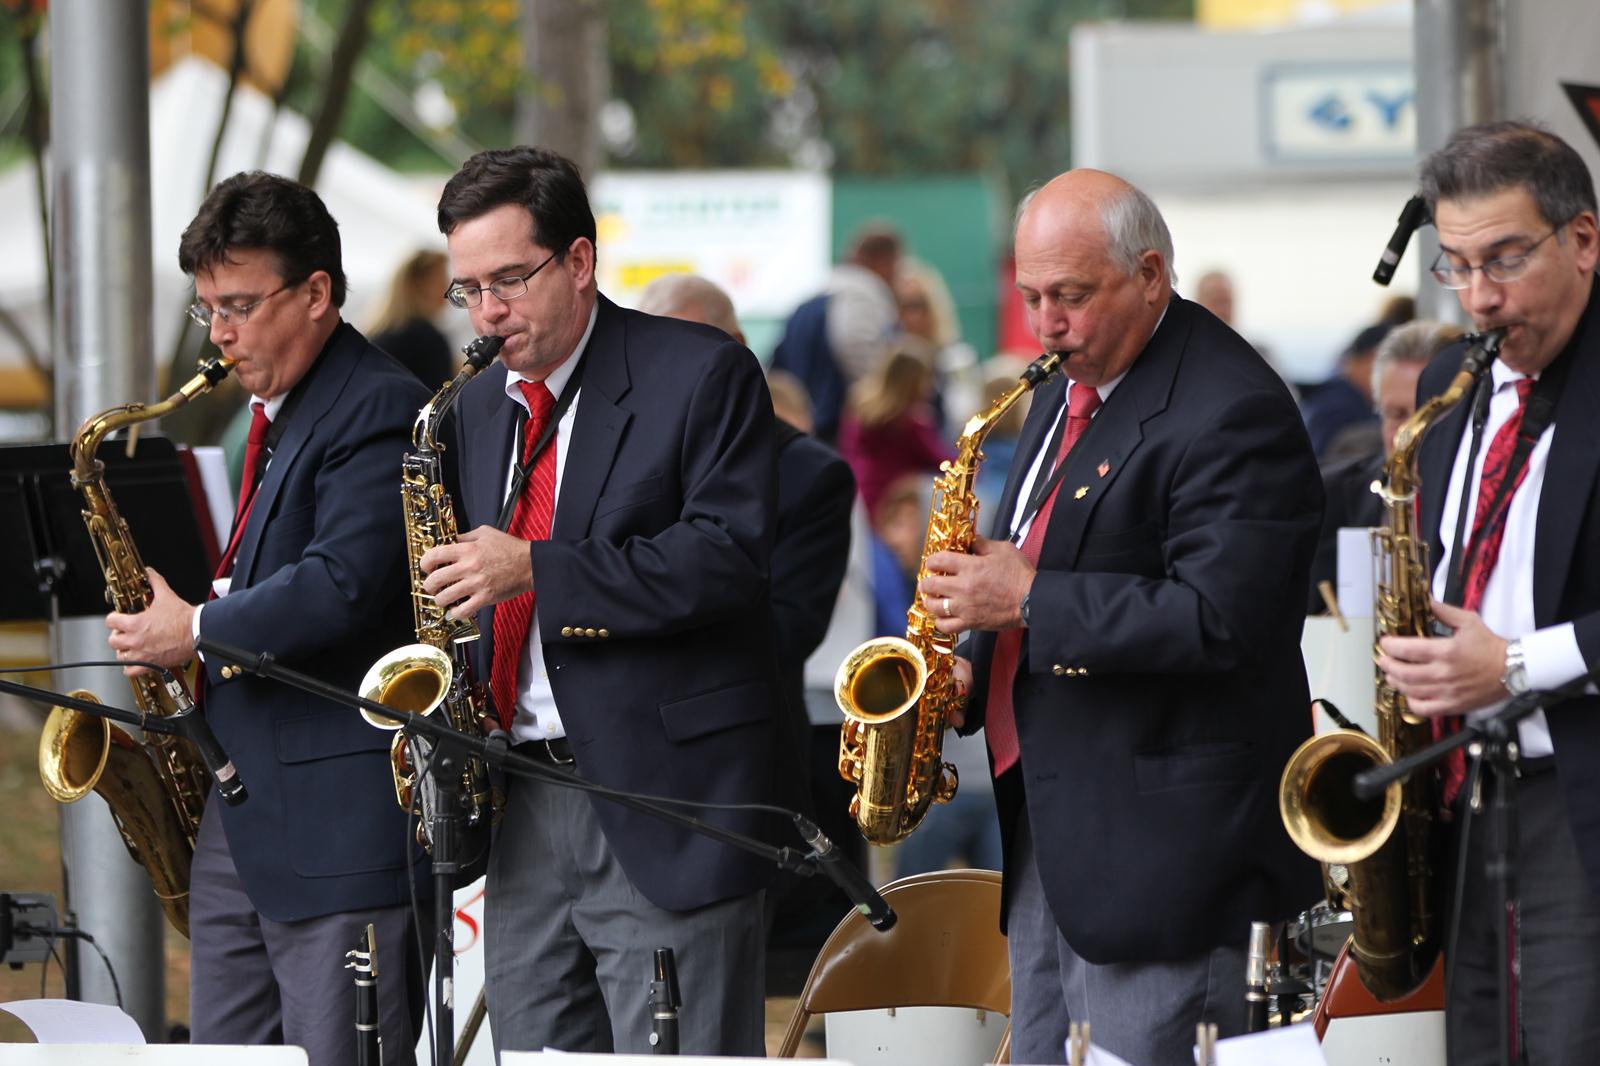 The Saxes Doing Their Thing. Left to Right - Chris Hildebrand, John Clark, Dave Jost and Tom Nutile